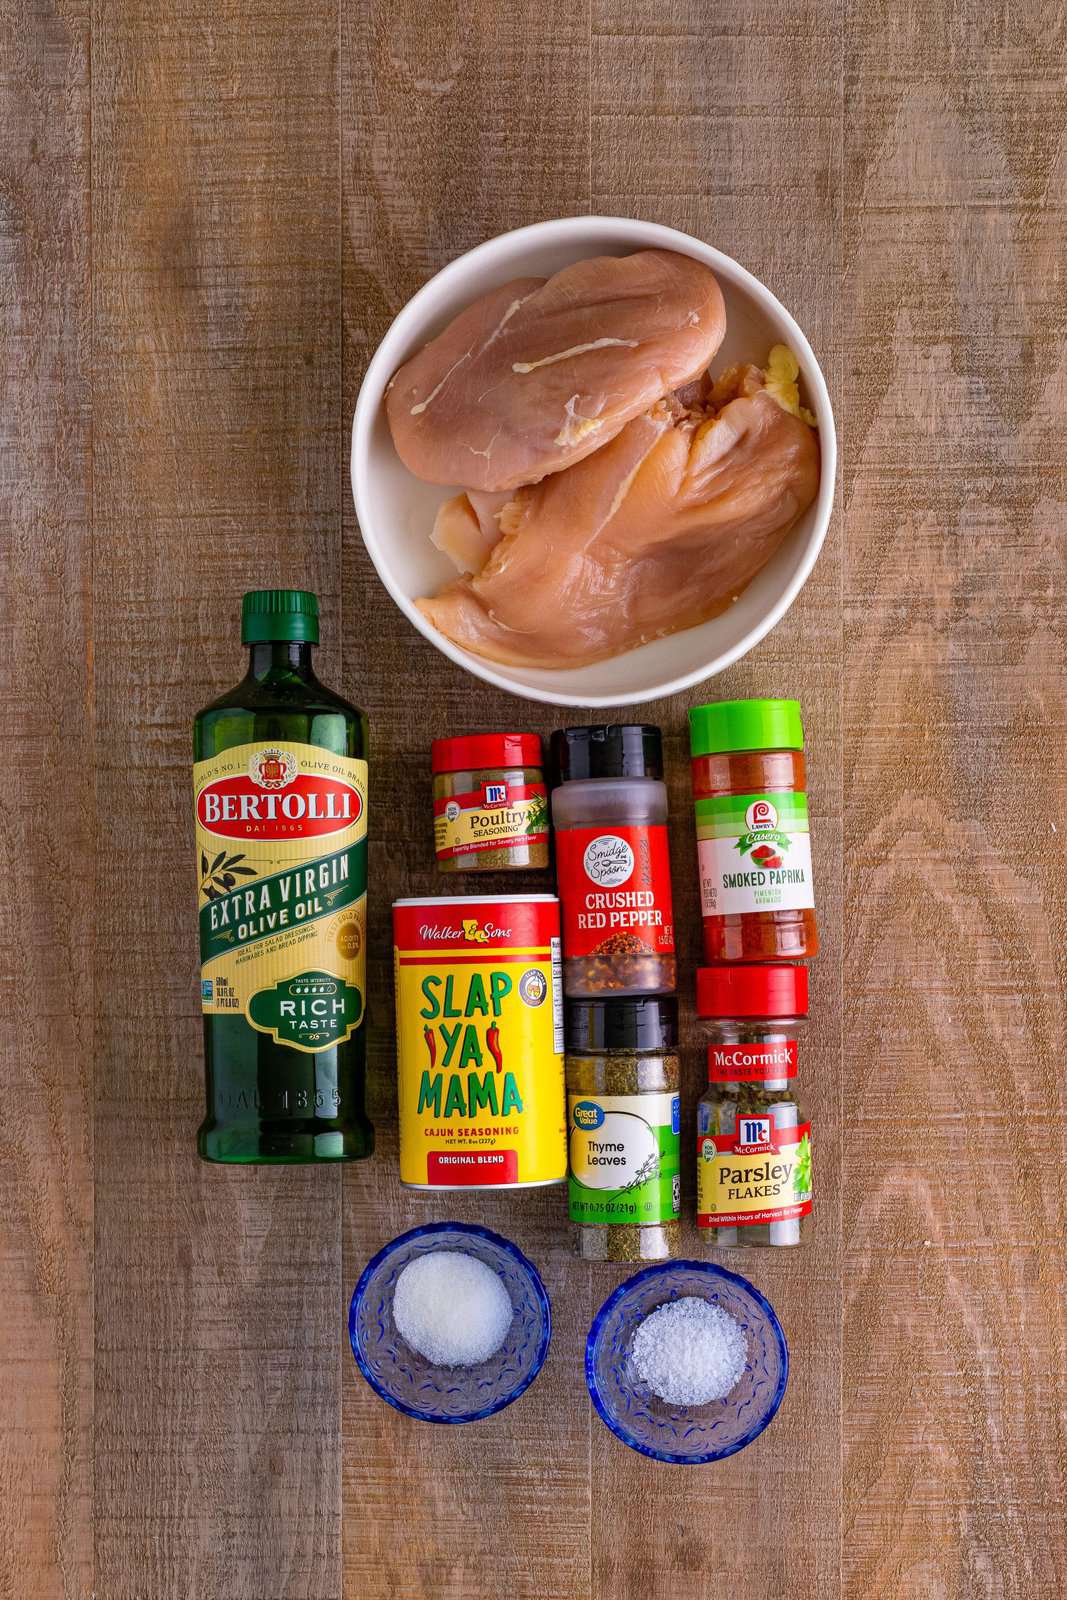 chicken breasts, olive oil, cajun seasoning, salt, paprika, red pepper flakes, poultry seasoning and dried thyme.